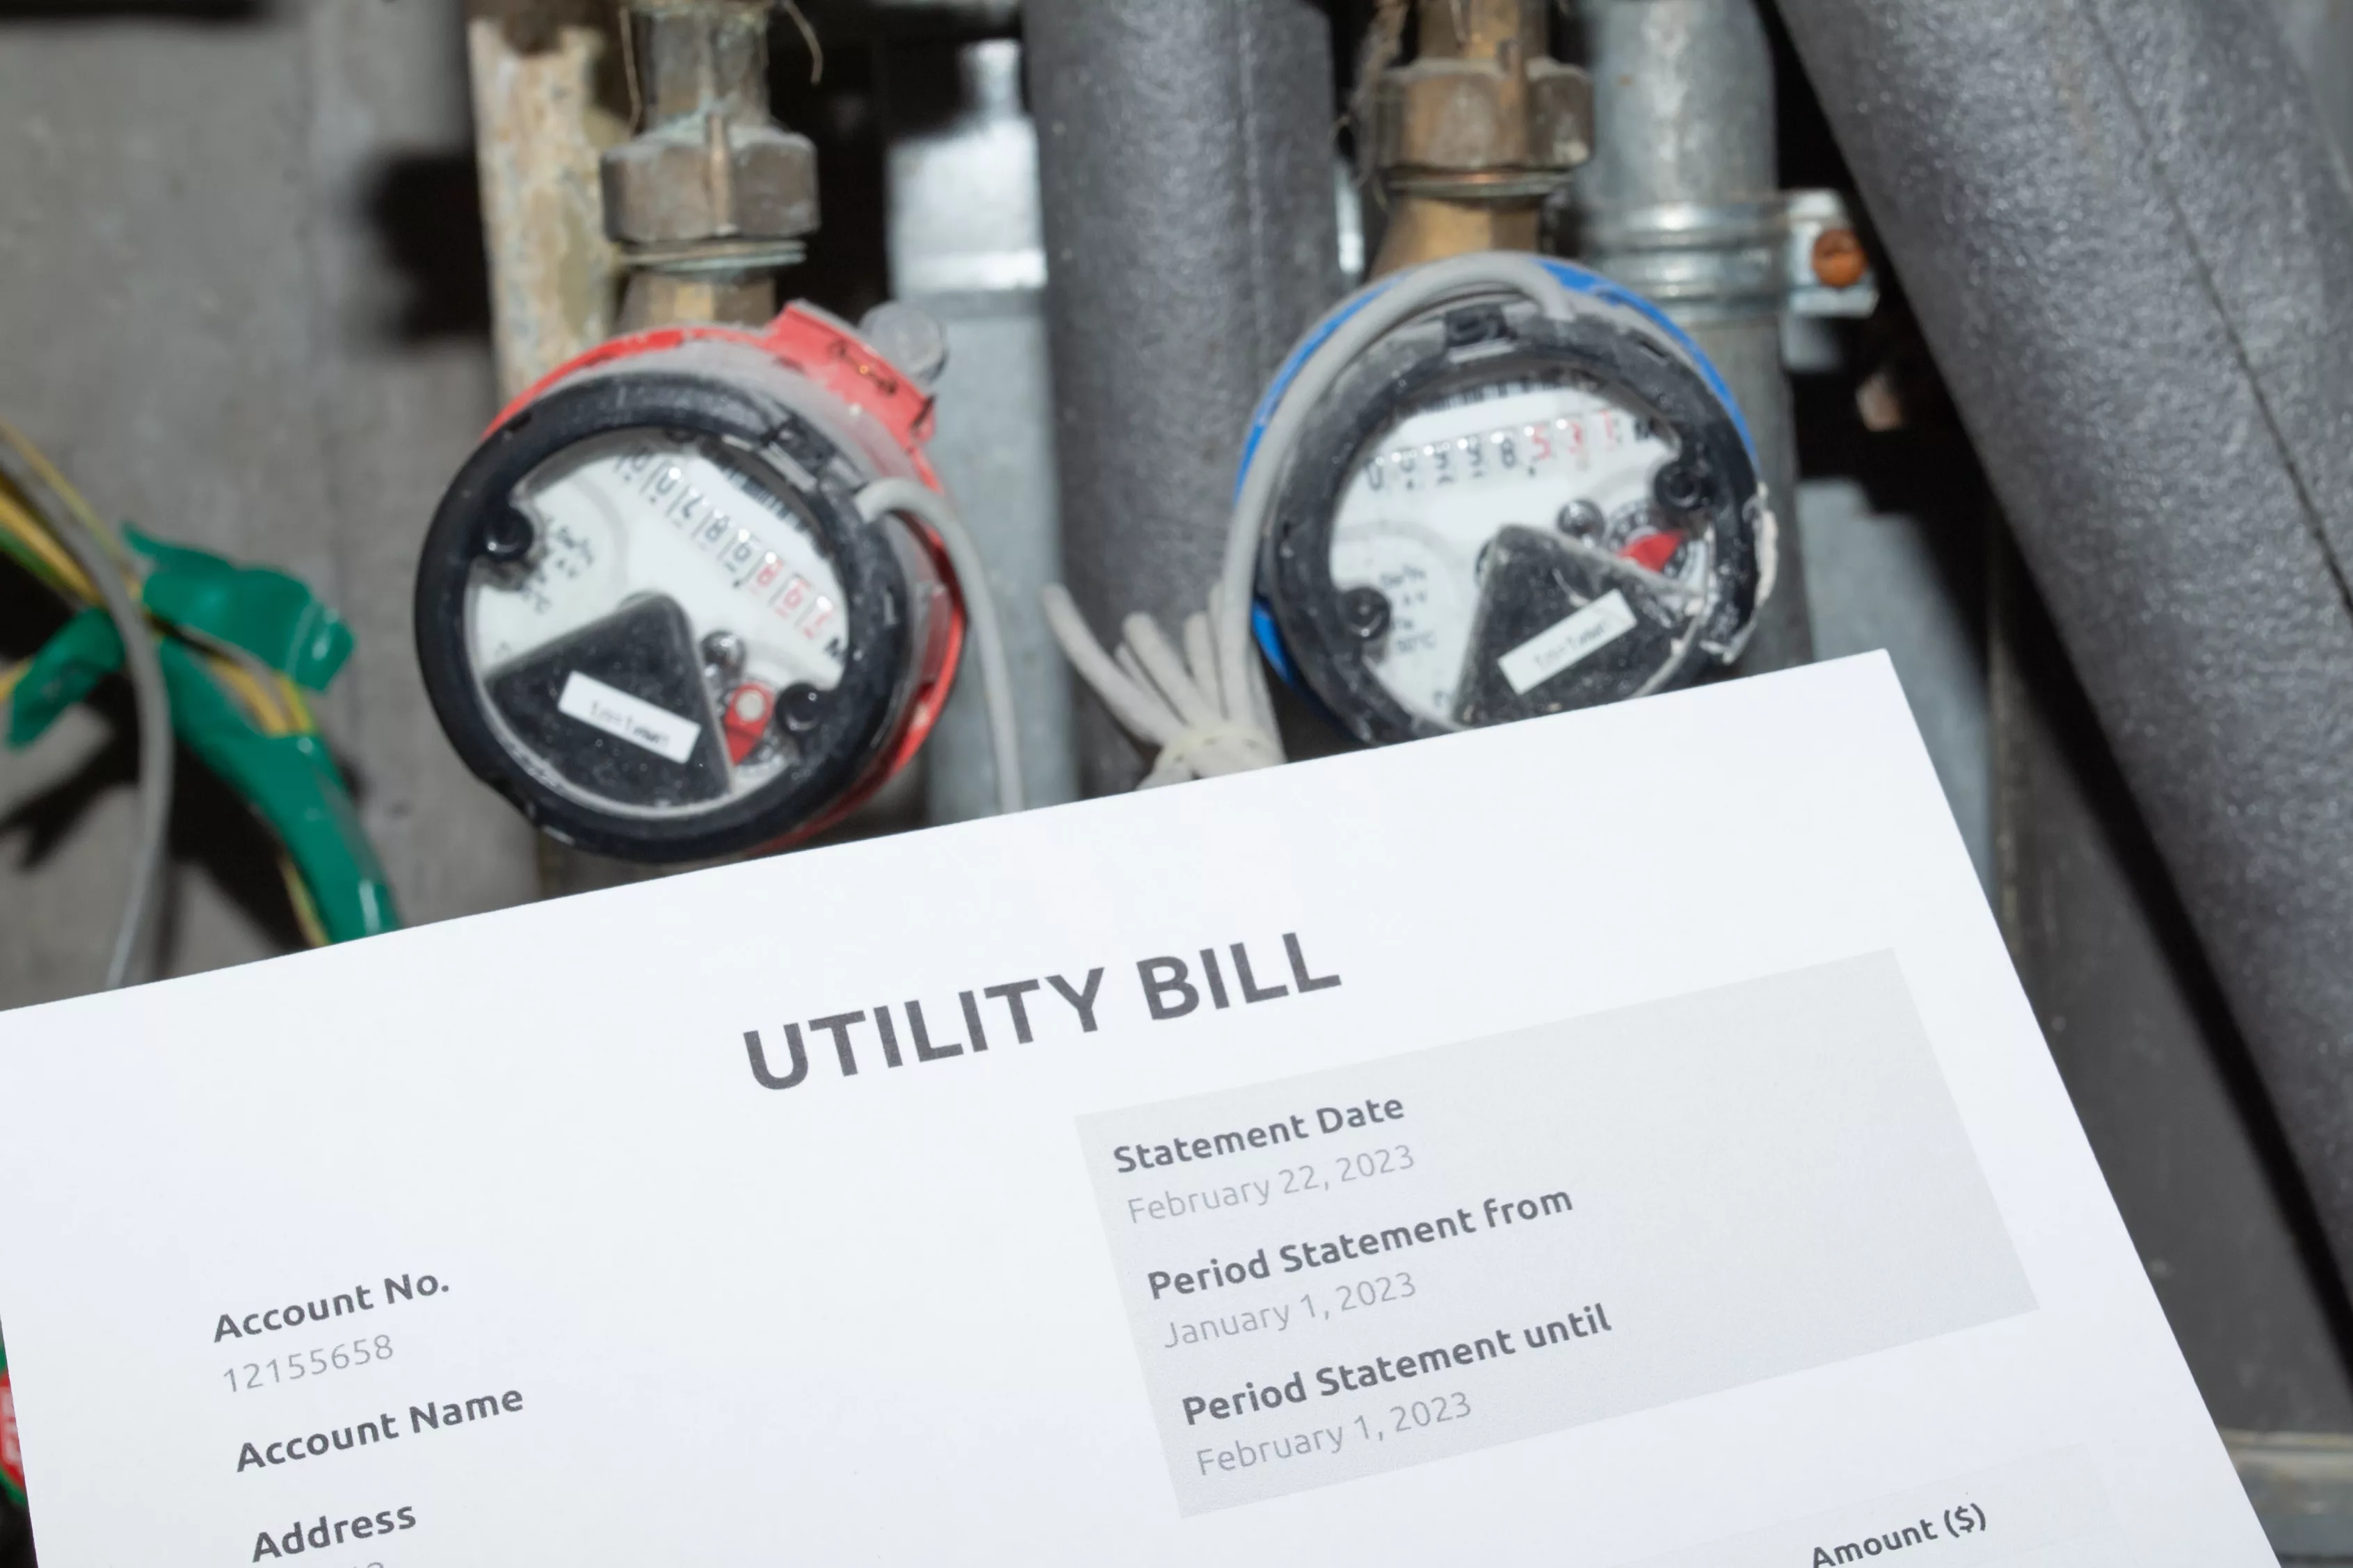 water bill, utility receipt and water meters, Price details on utility bill